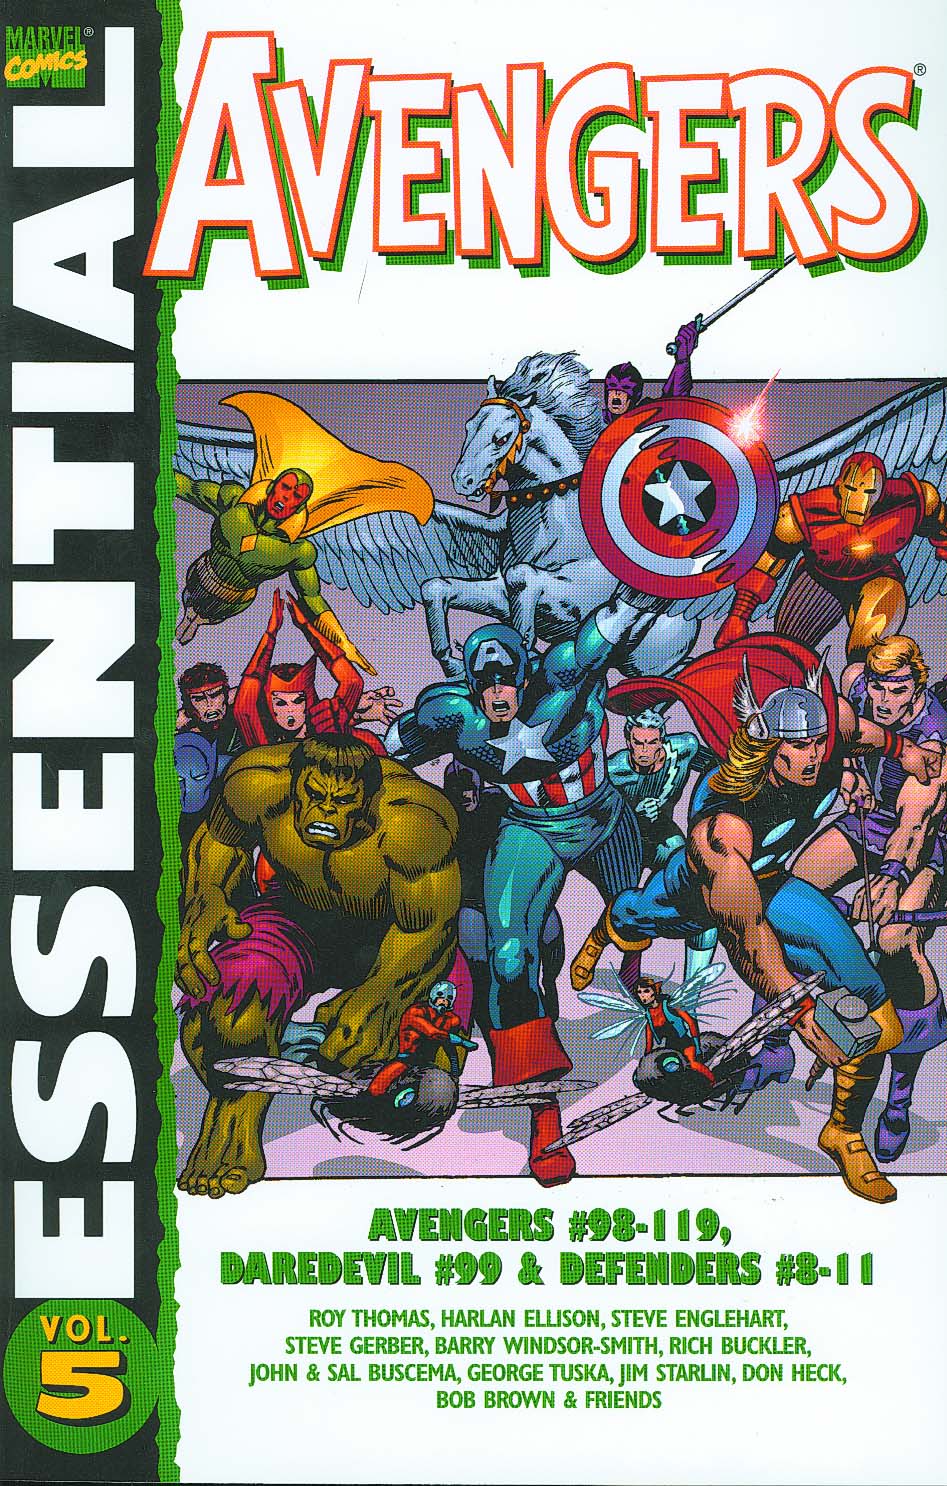 Essential Avengers Vol. 4, cover, art by Barry Windsor Smith